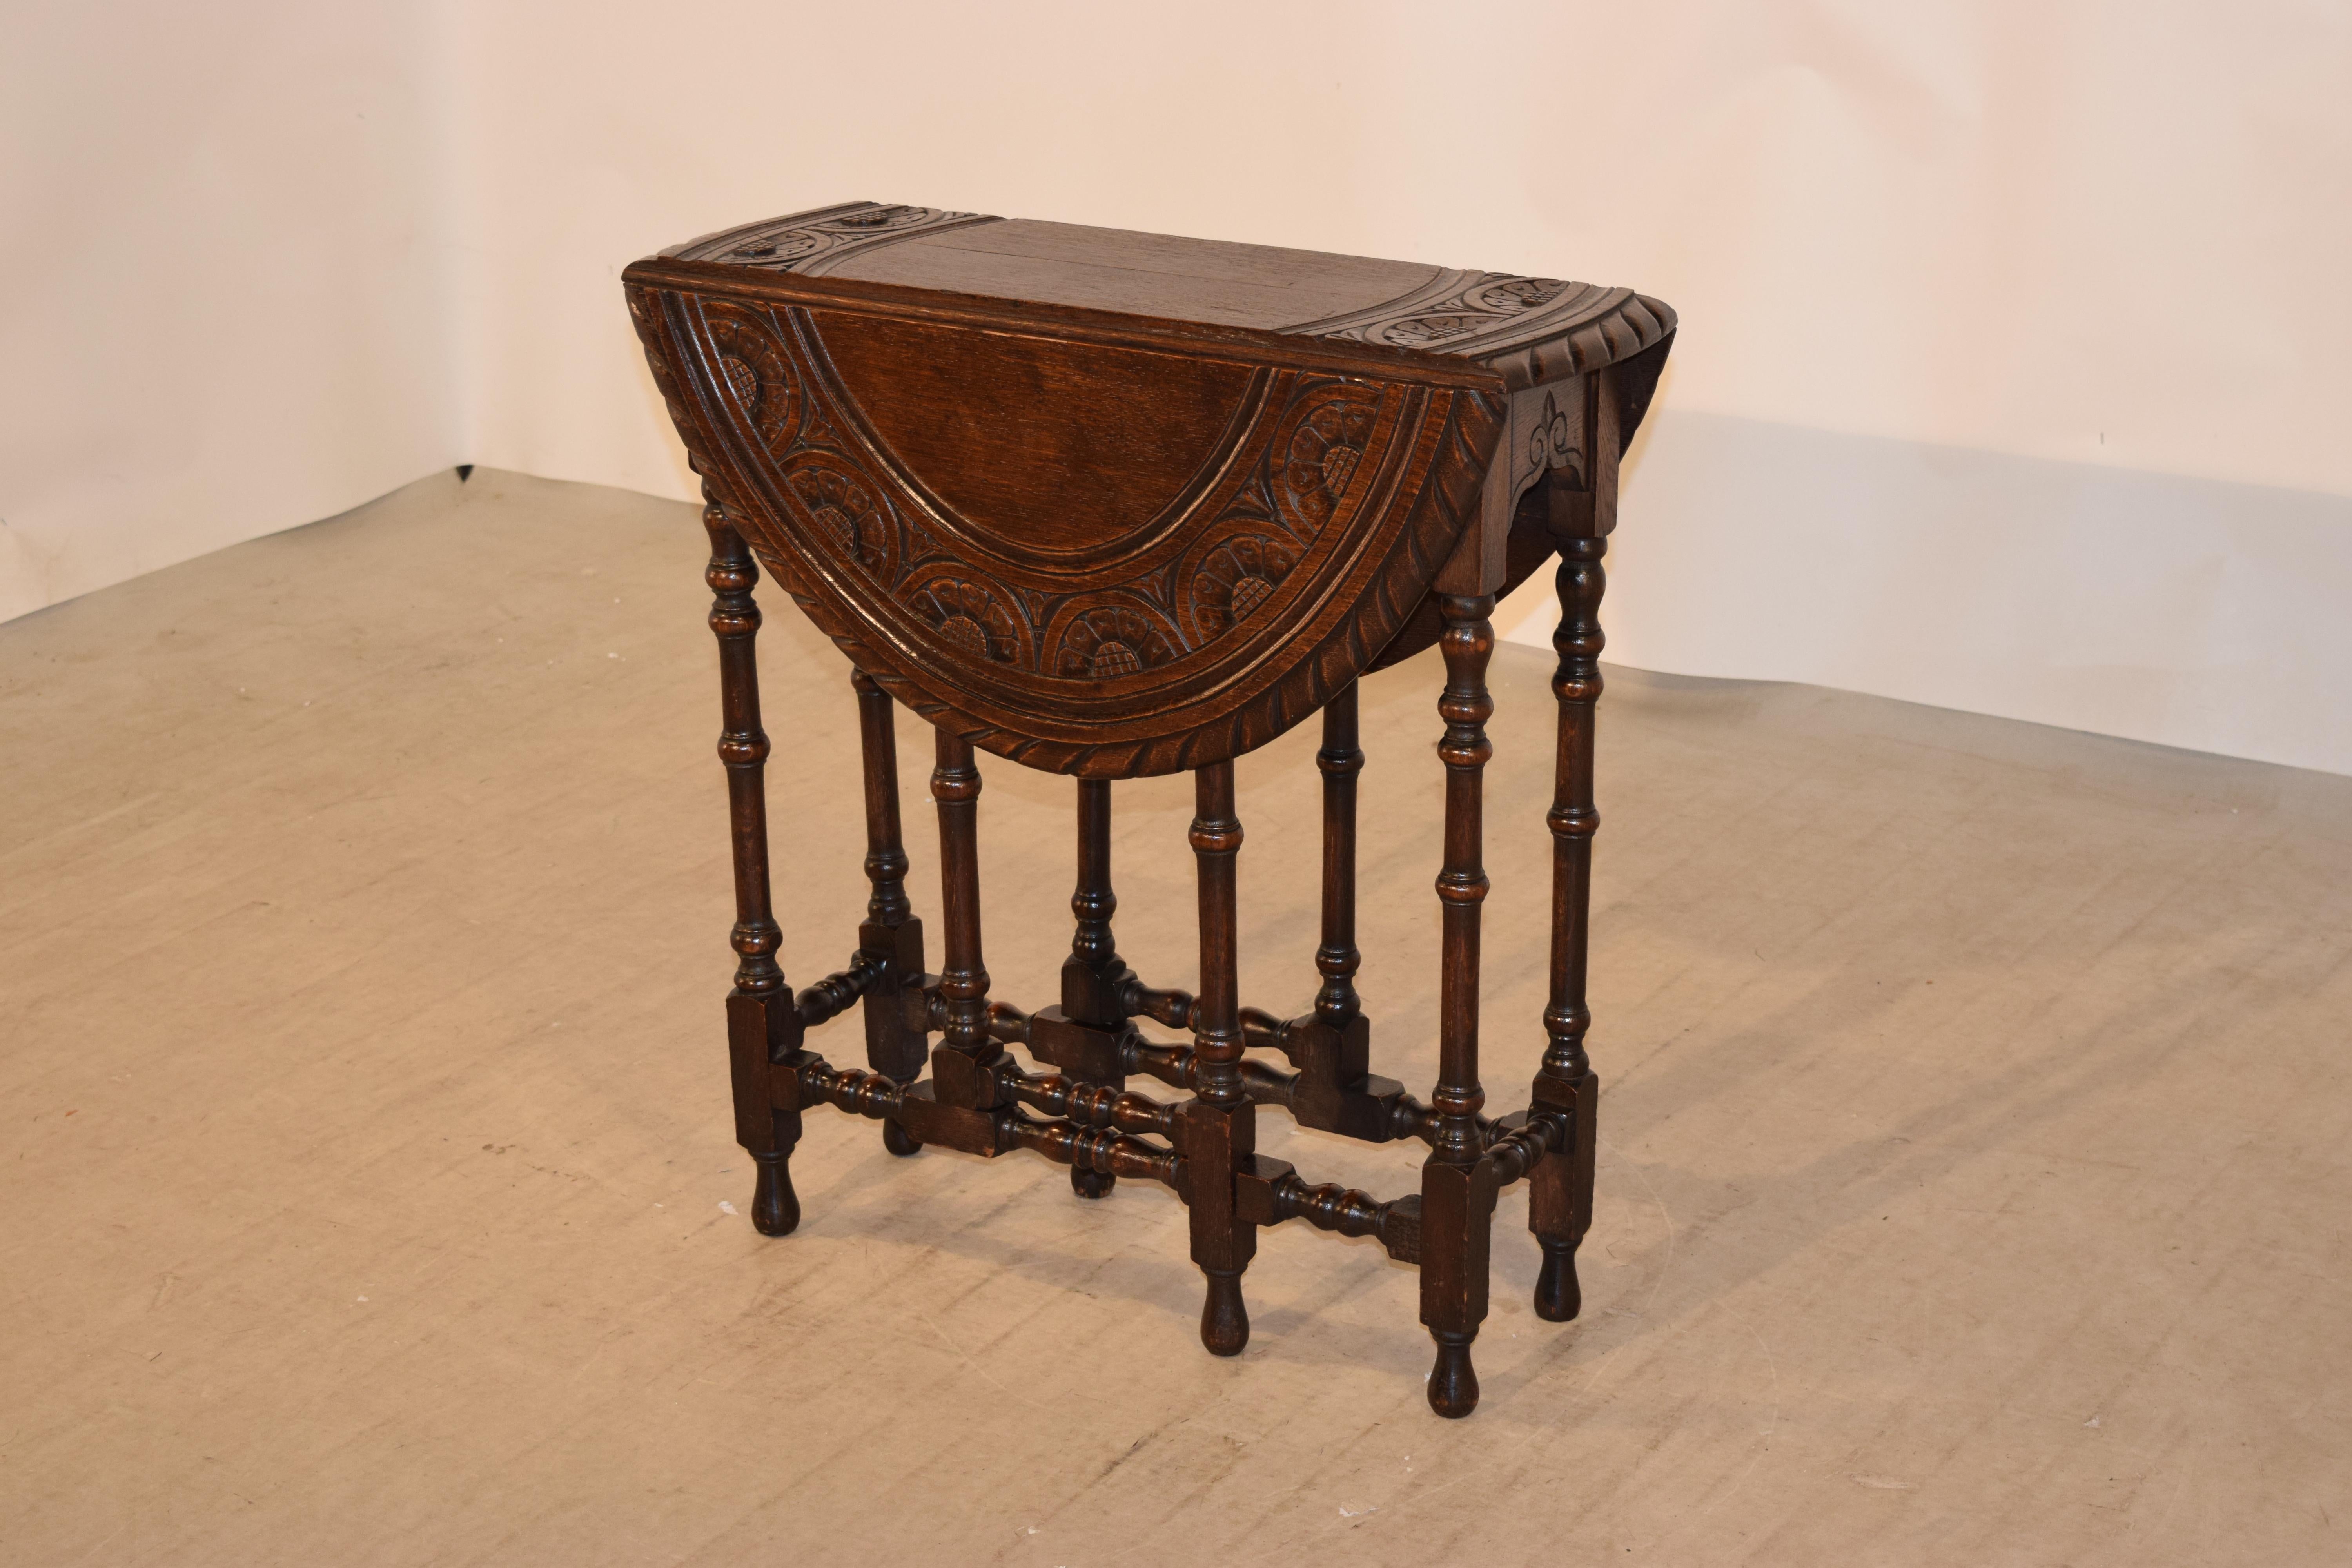 Hand-Carved 19th Century English Carved Gateleg Table